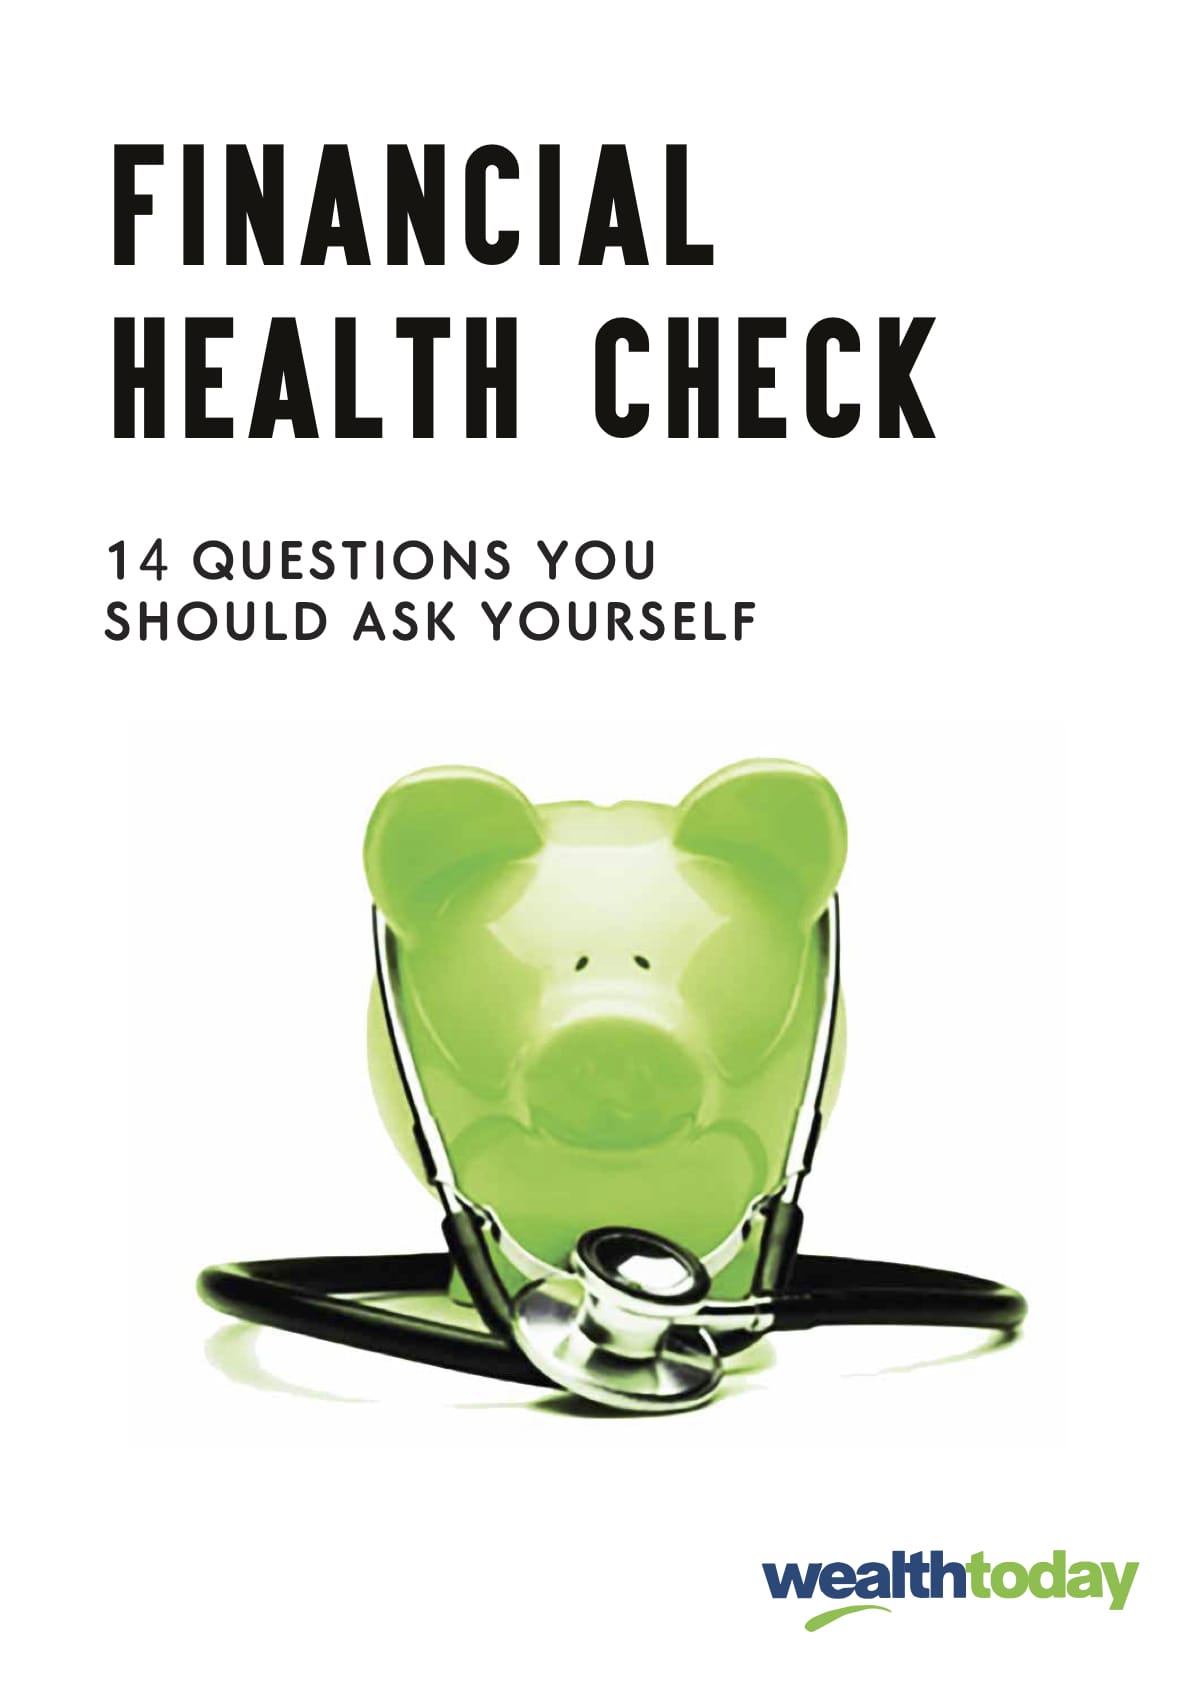 Financial-Health-Check-14-questions-you-should-ask-yourself-WT-Form-201810